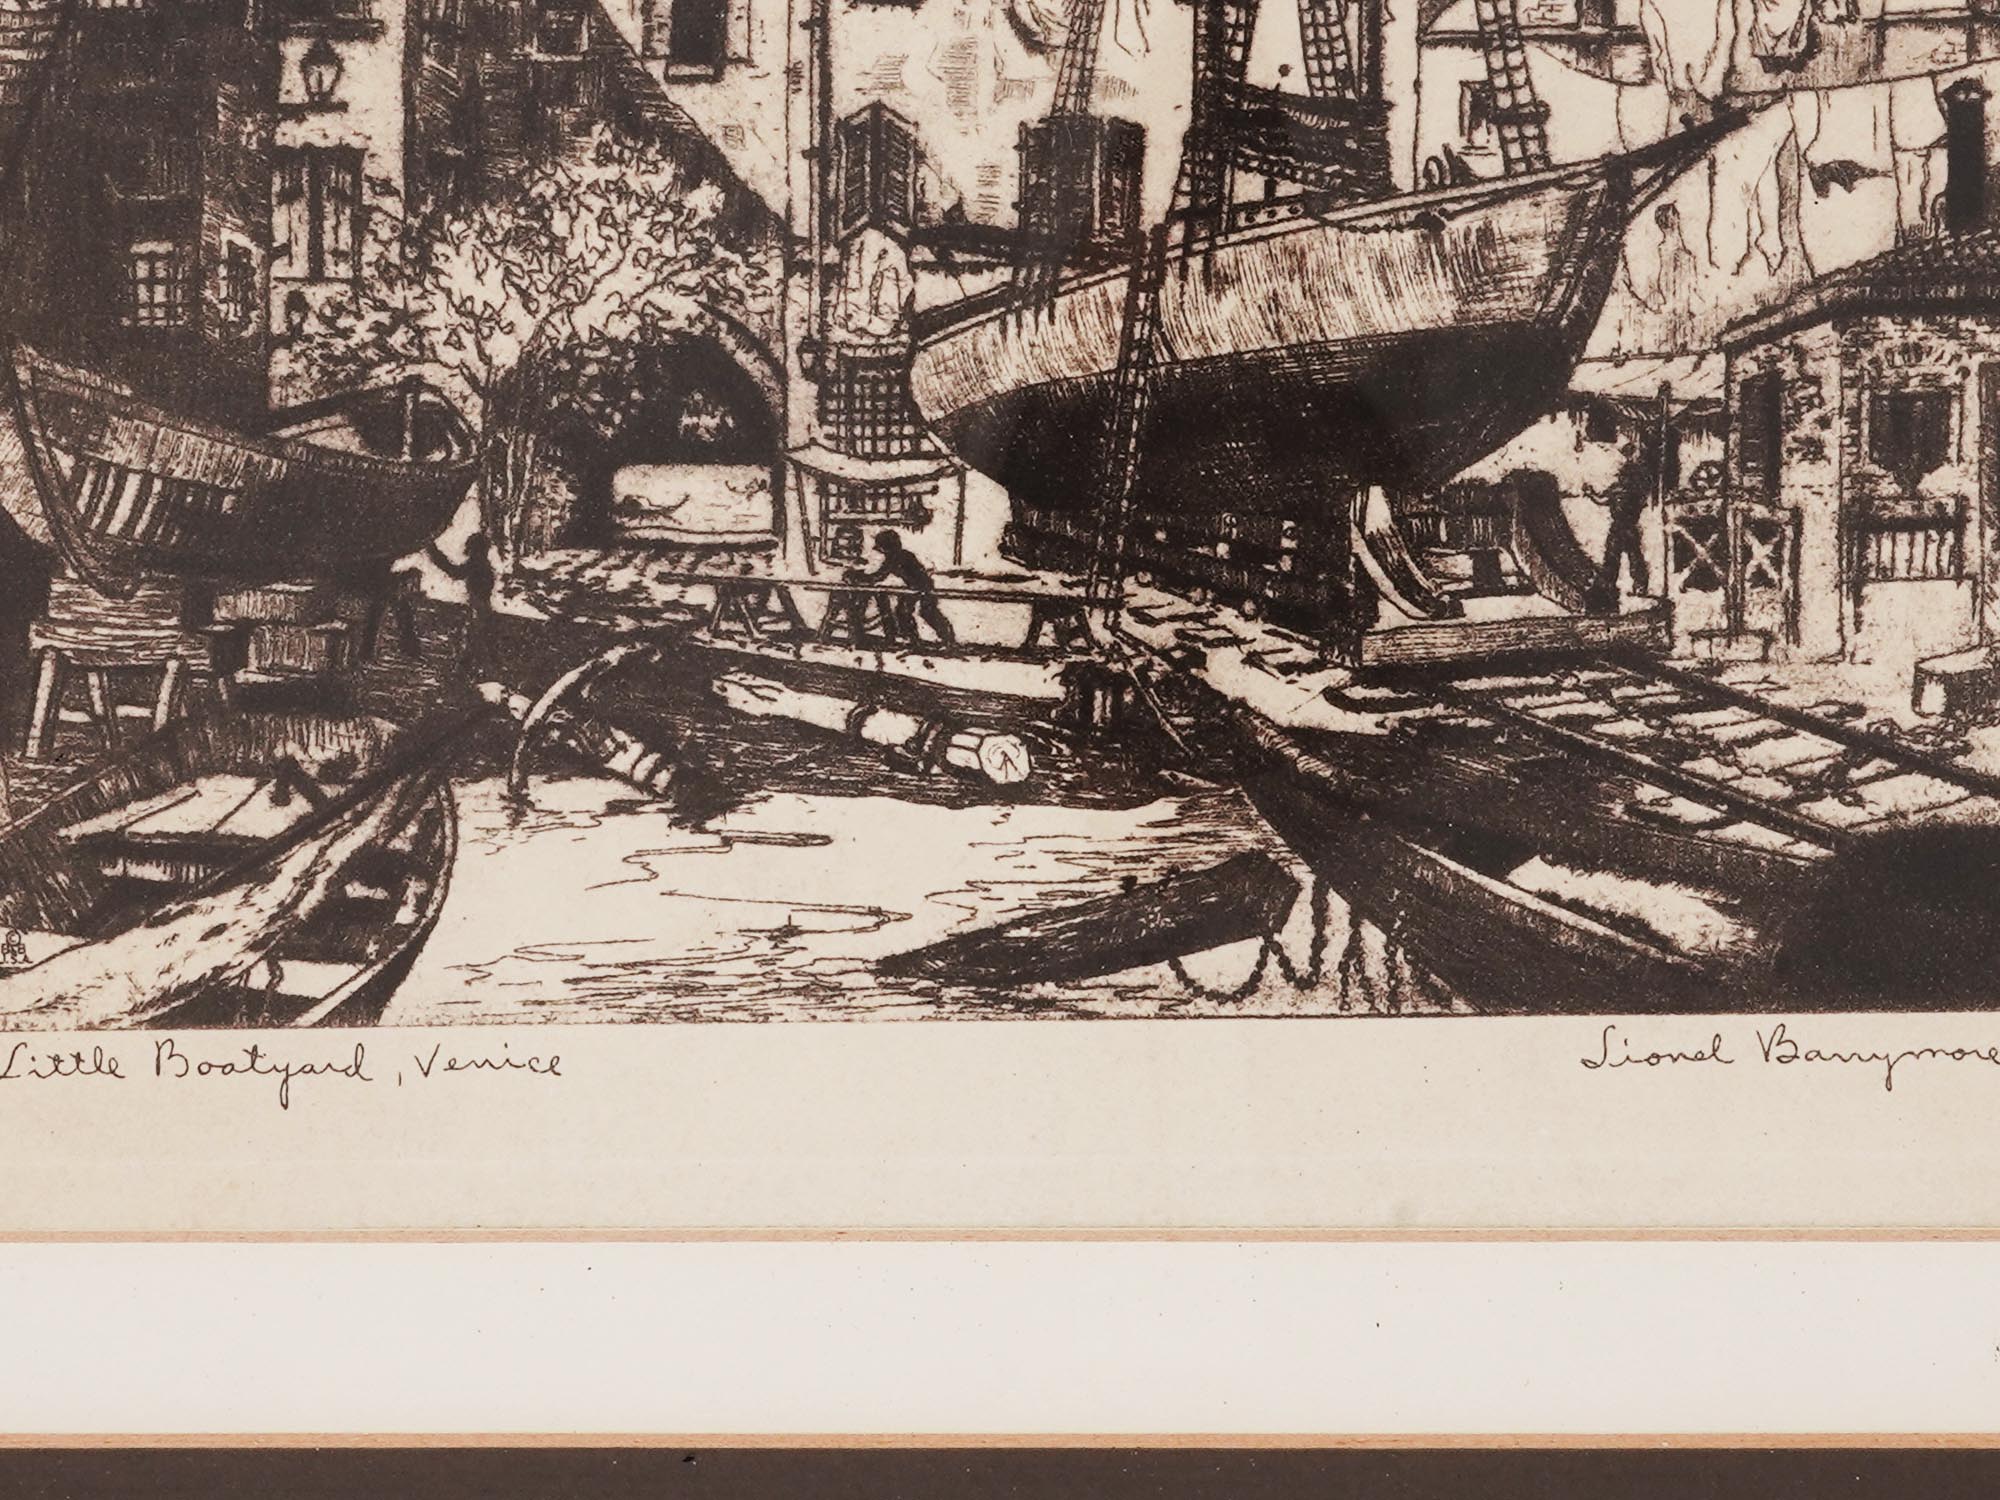 VENETIAN LANDSCAPE ETCHING BY LIONEL BARRYMORE PIC-2